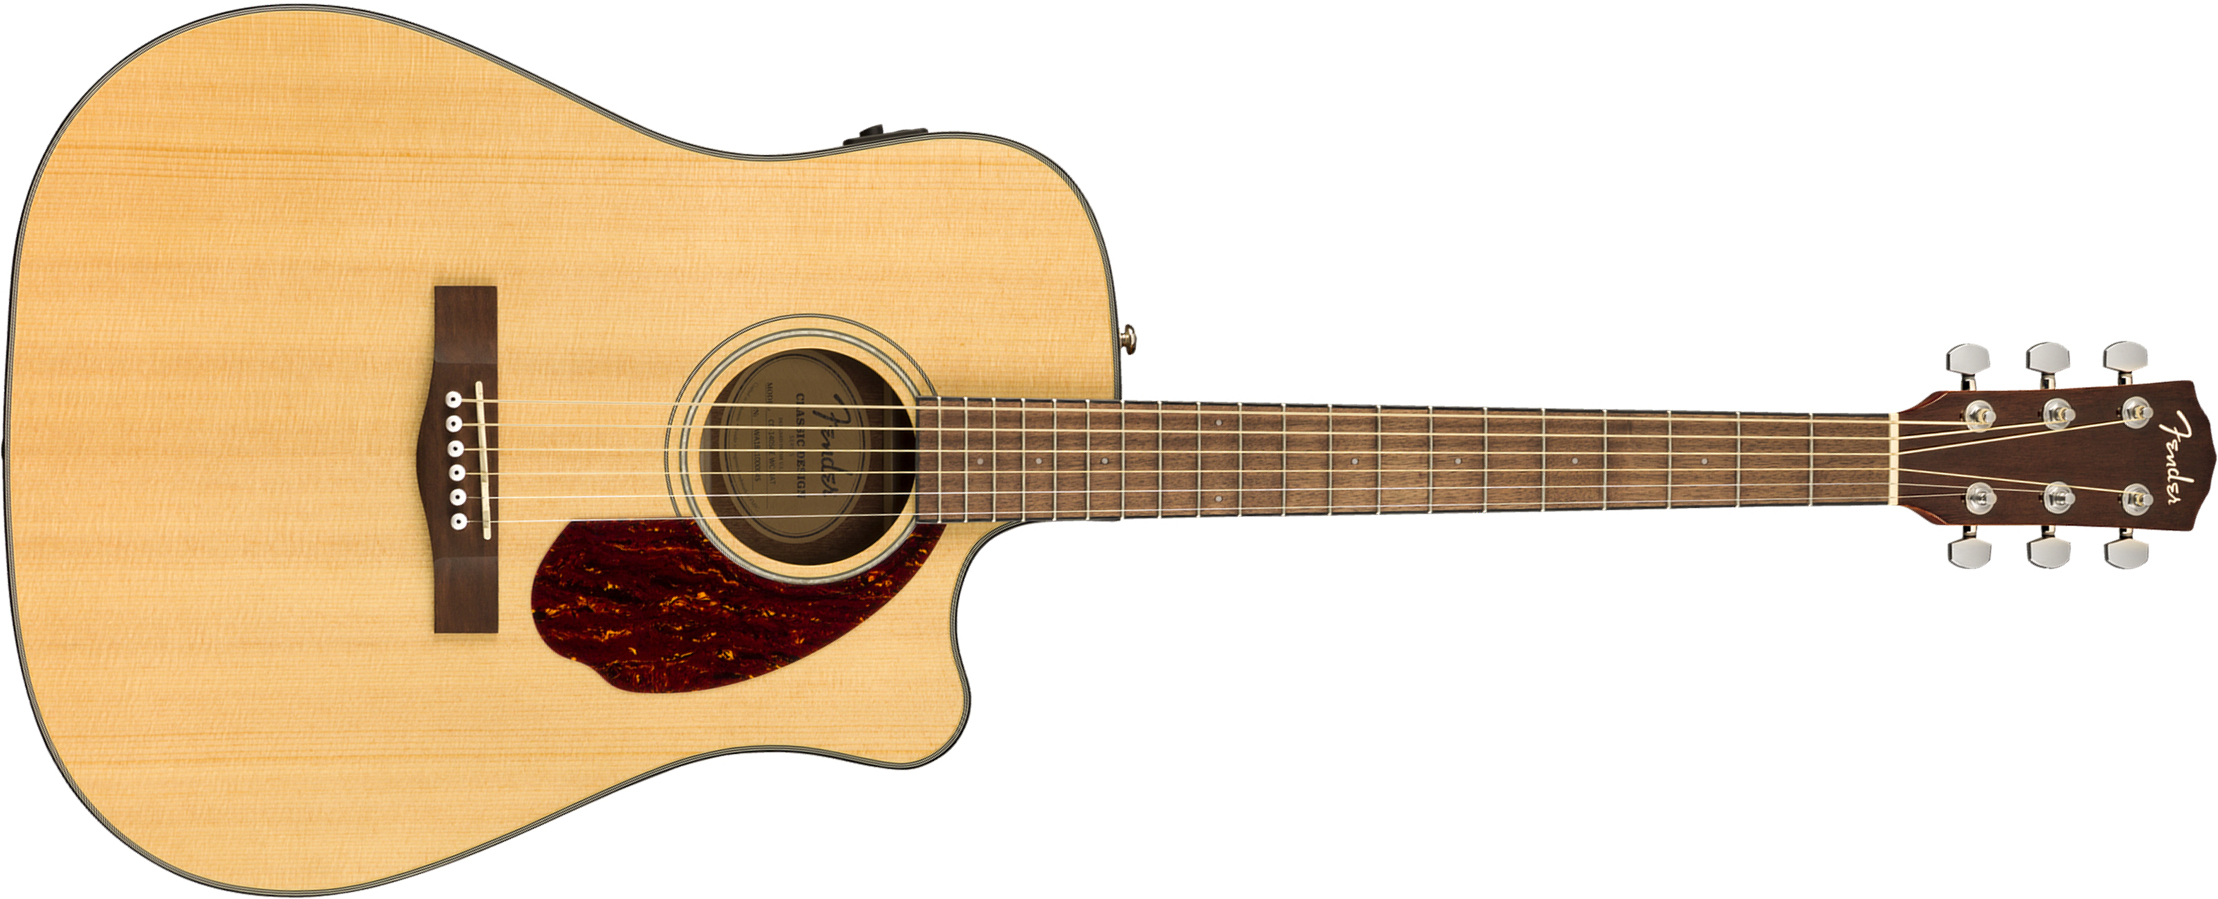 Fender Cd-140sce Classic Design Dreadnought Cw Epicea Ovangkol Wal +etui - Natural - Guitare Electro Acoustique - Main picture